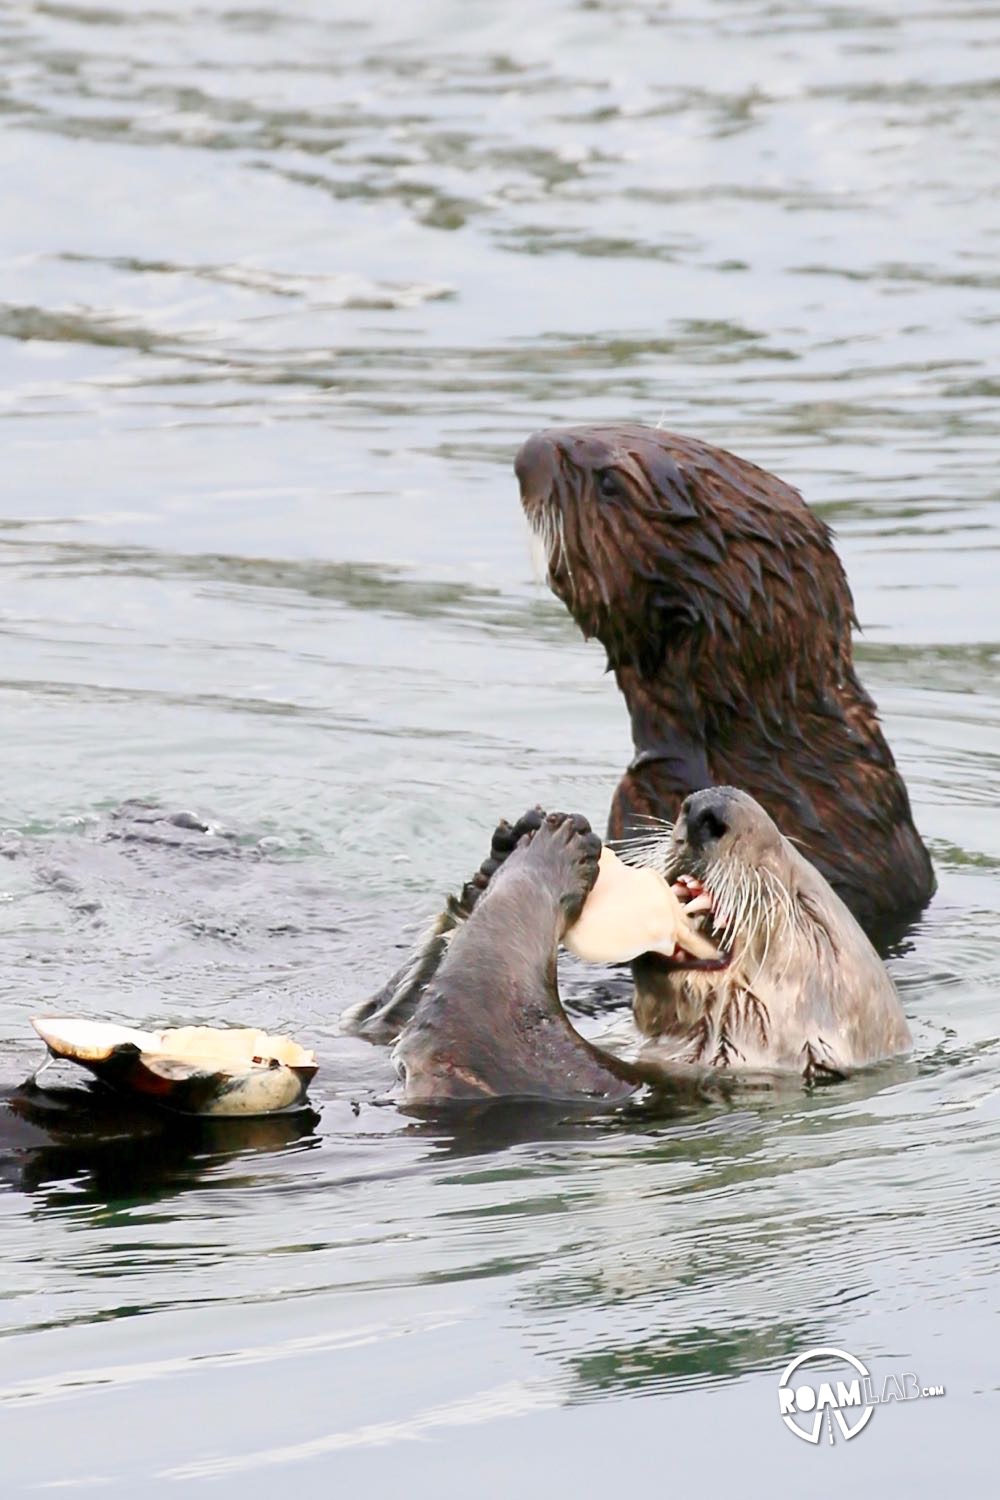 Mother sea otter fishes a clam out of Morro Bay. The pup is not so skilled.